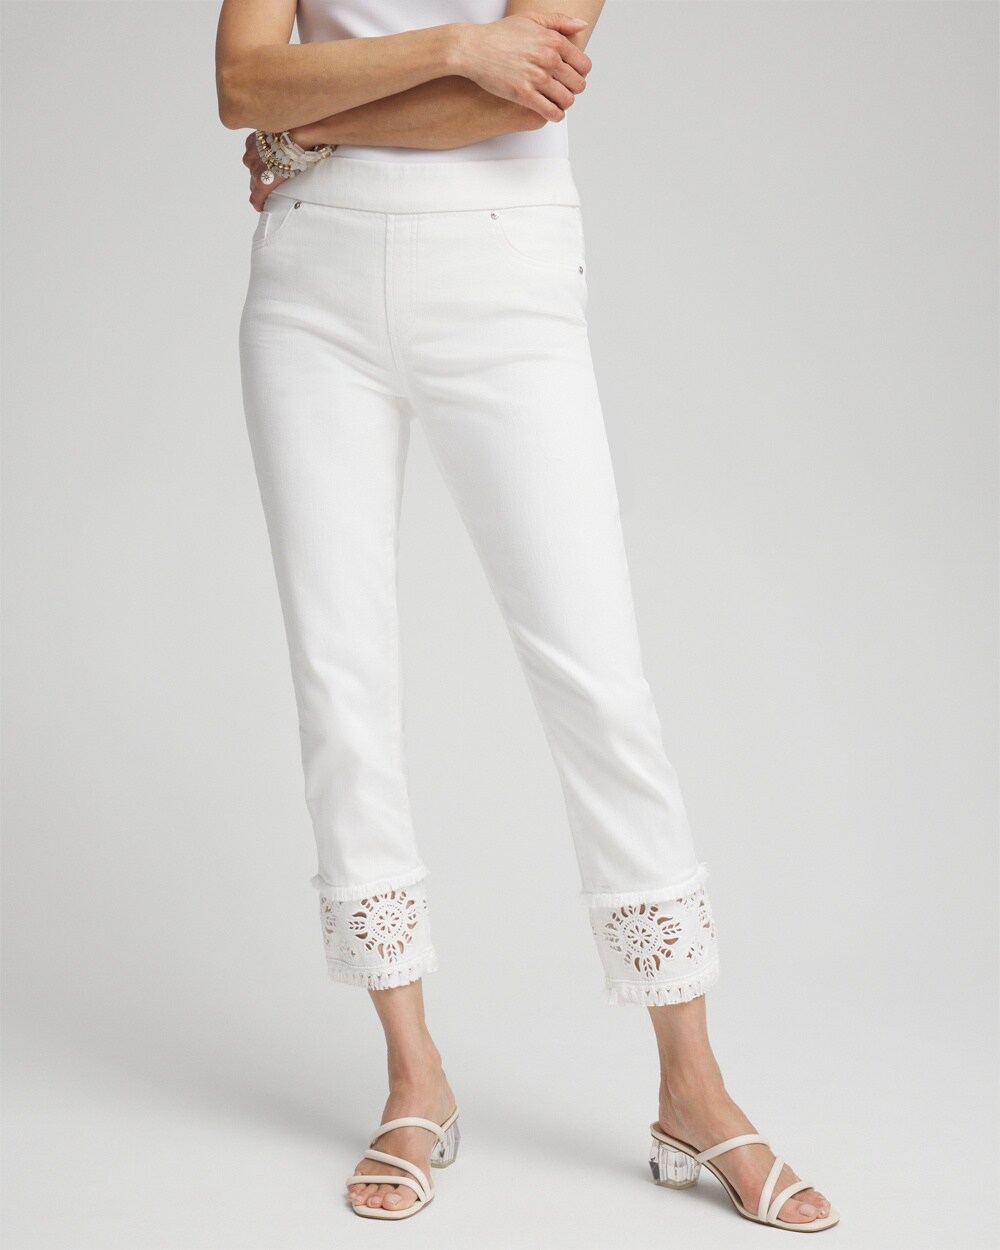 No Stain Embellished Pull-on Cropped Jeans